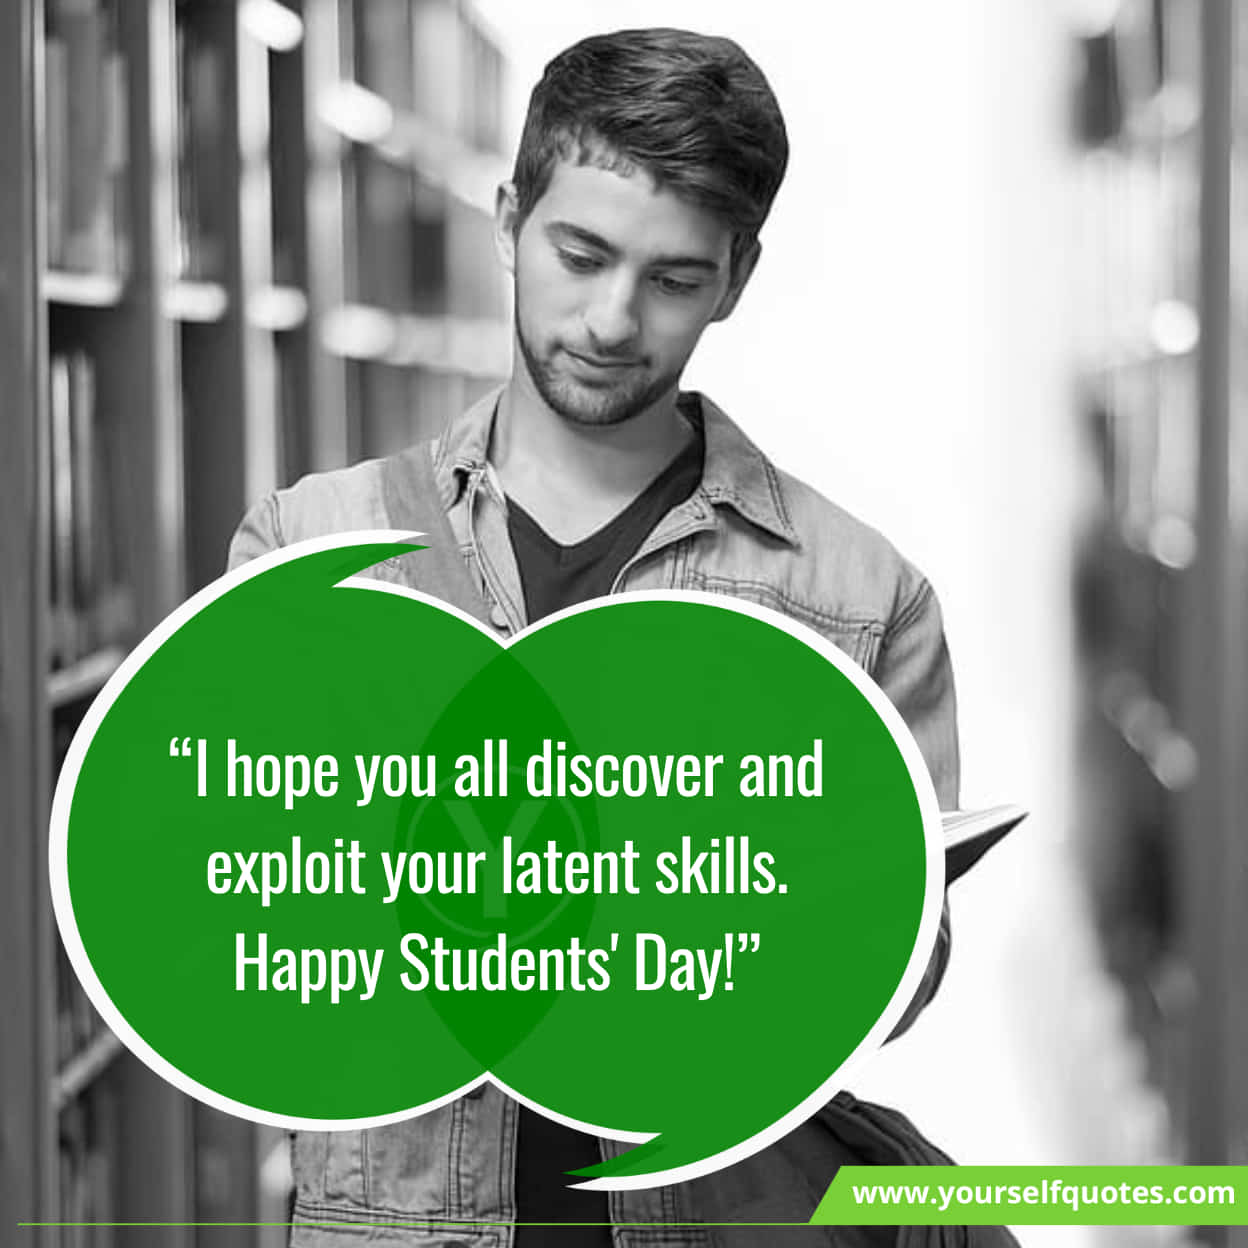 Exciting Wishes On Happy Students Day